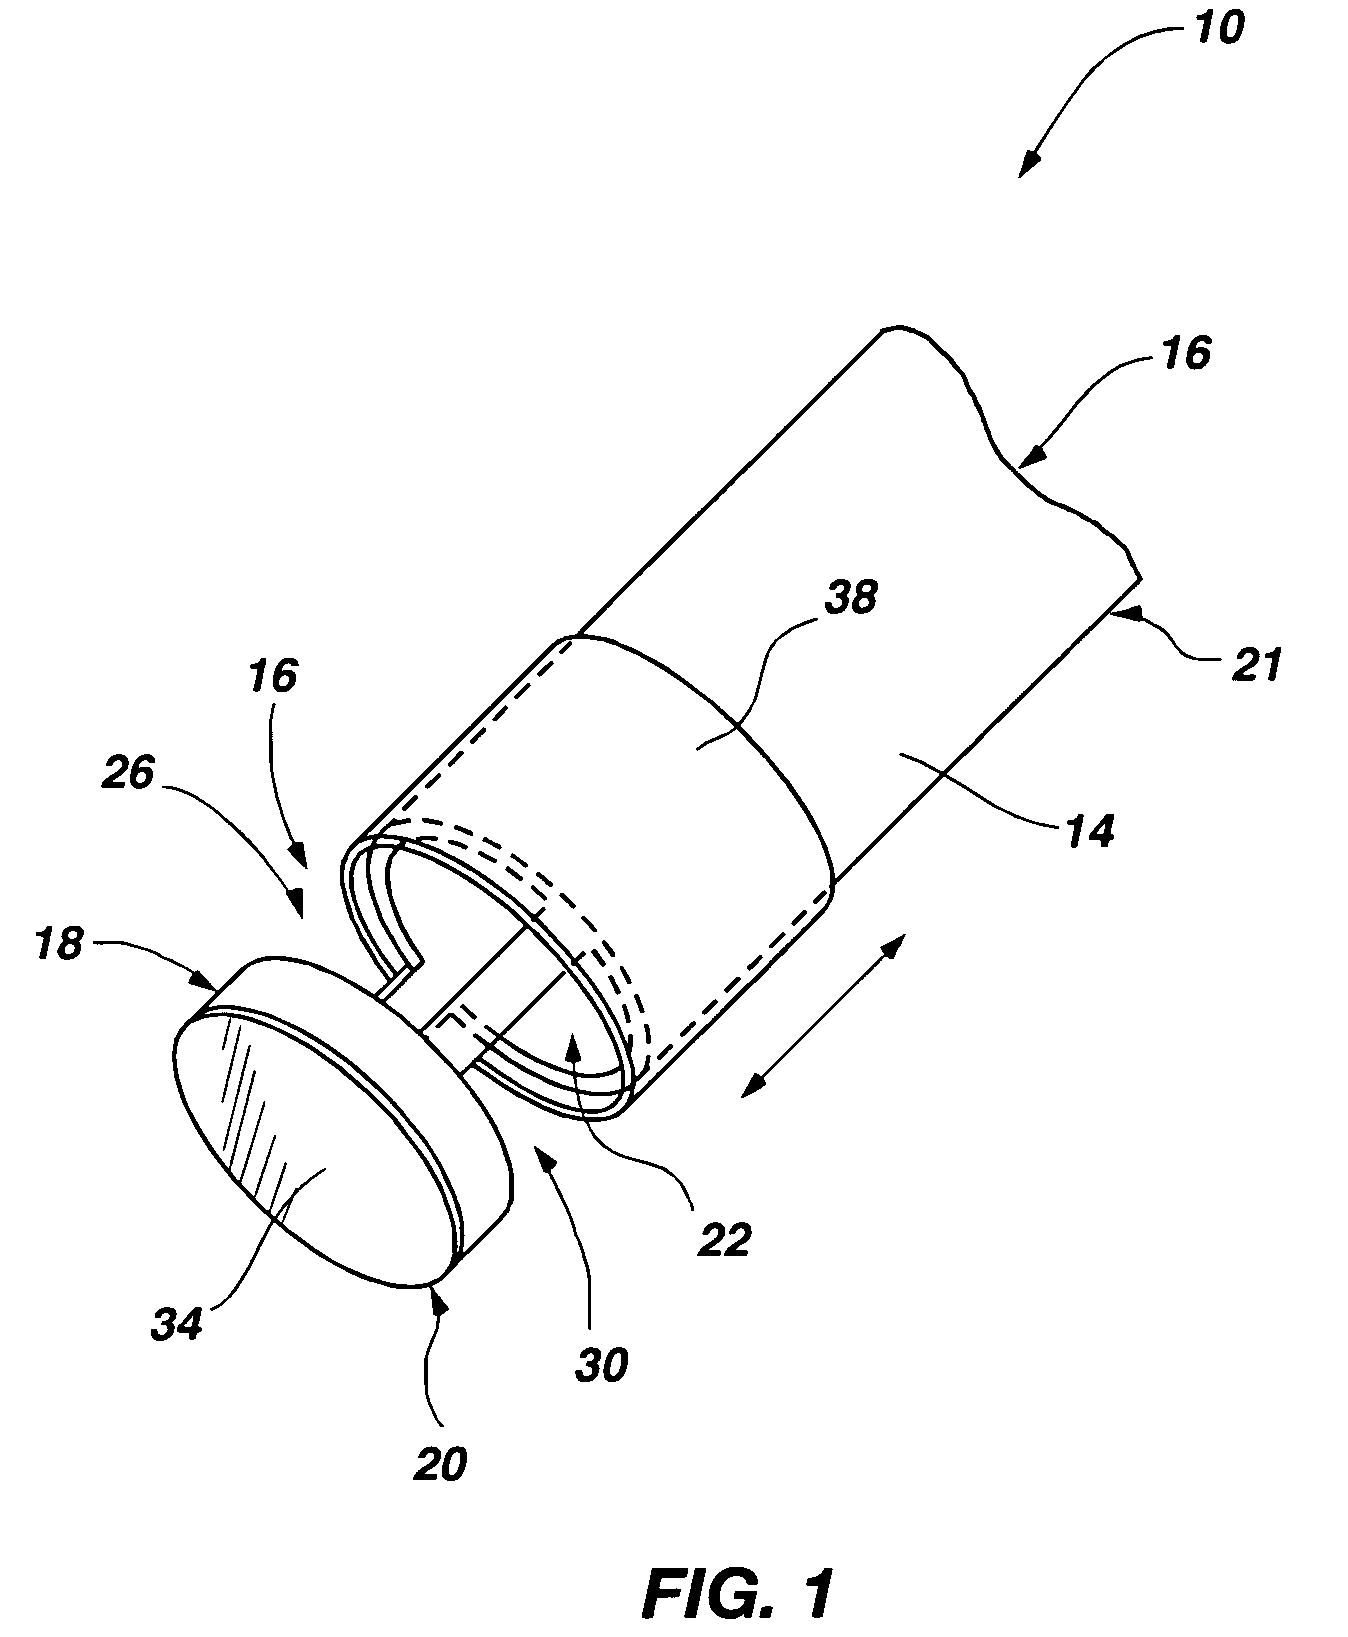 Flow force compensated sleeve valve